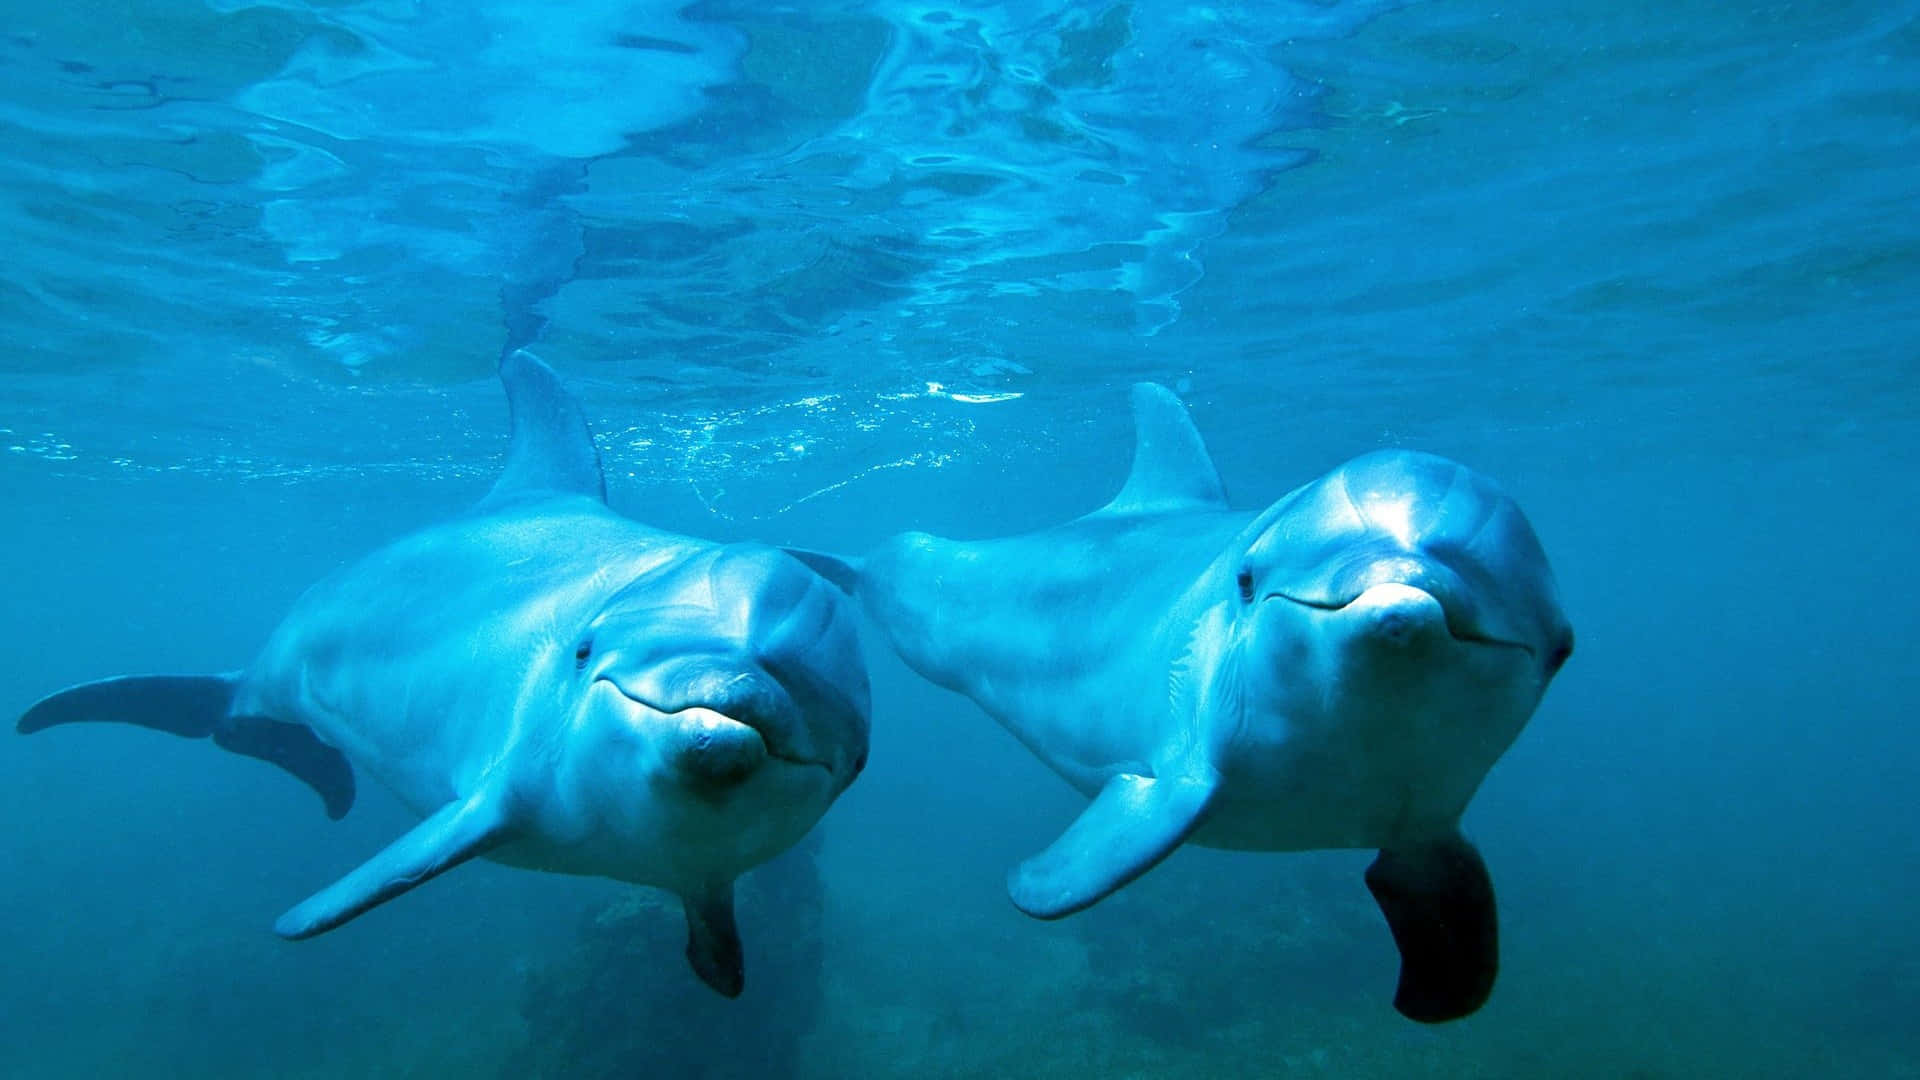 Two dolphins jump in perfect synchrony above the surface of the ocean.